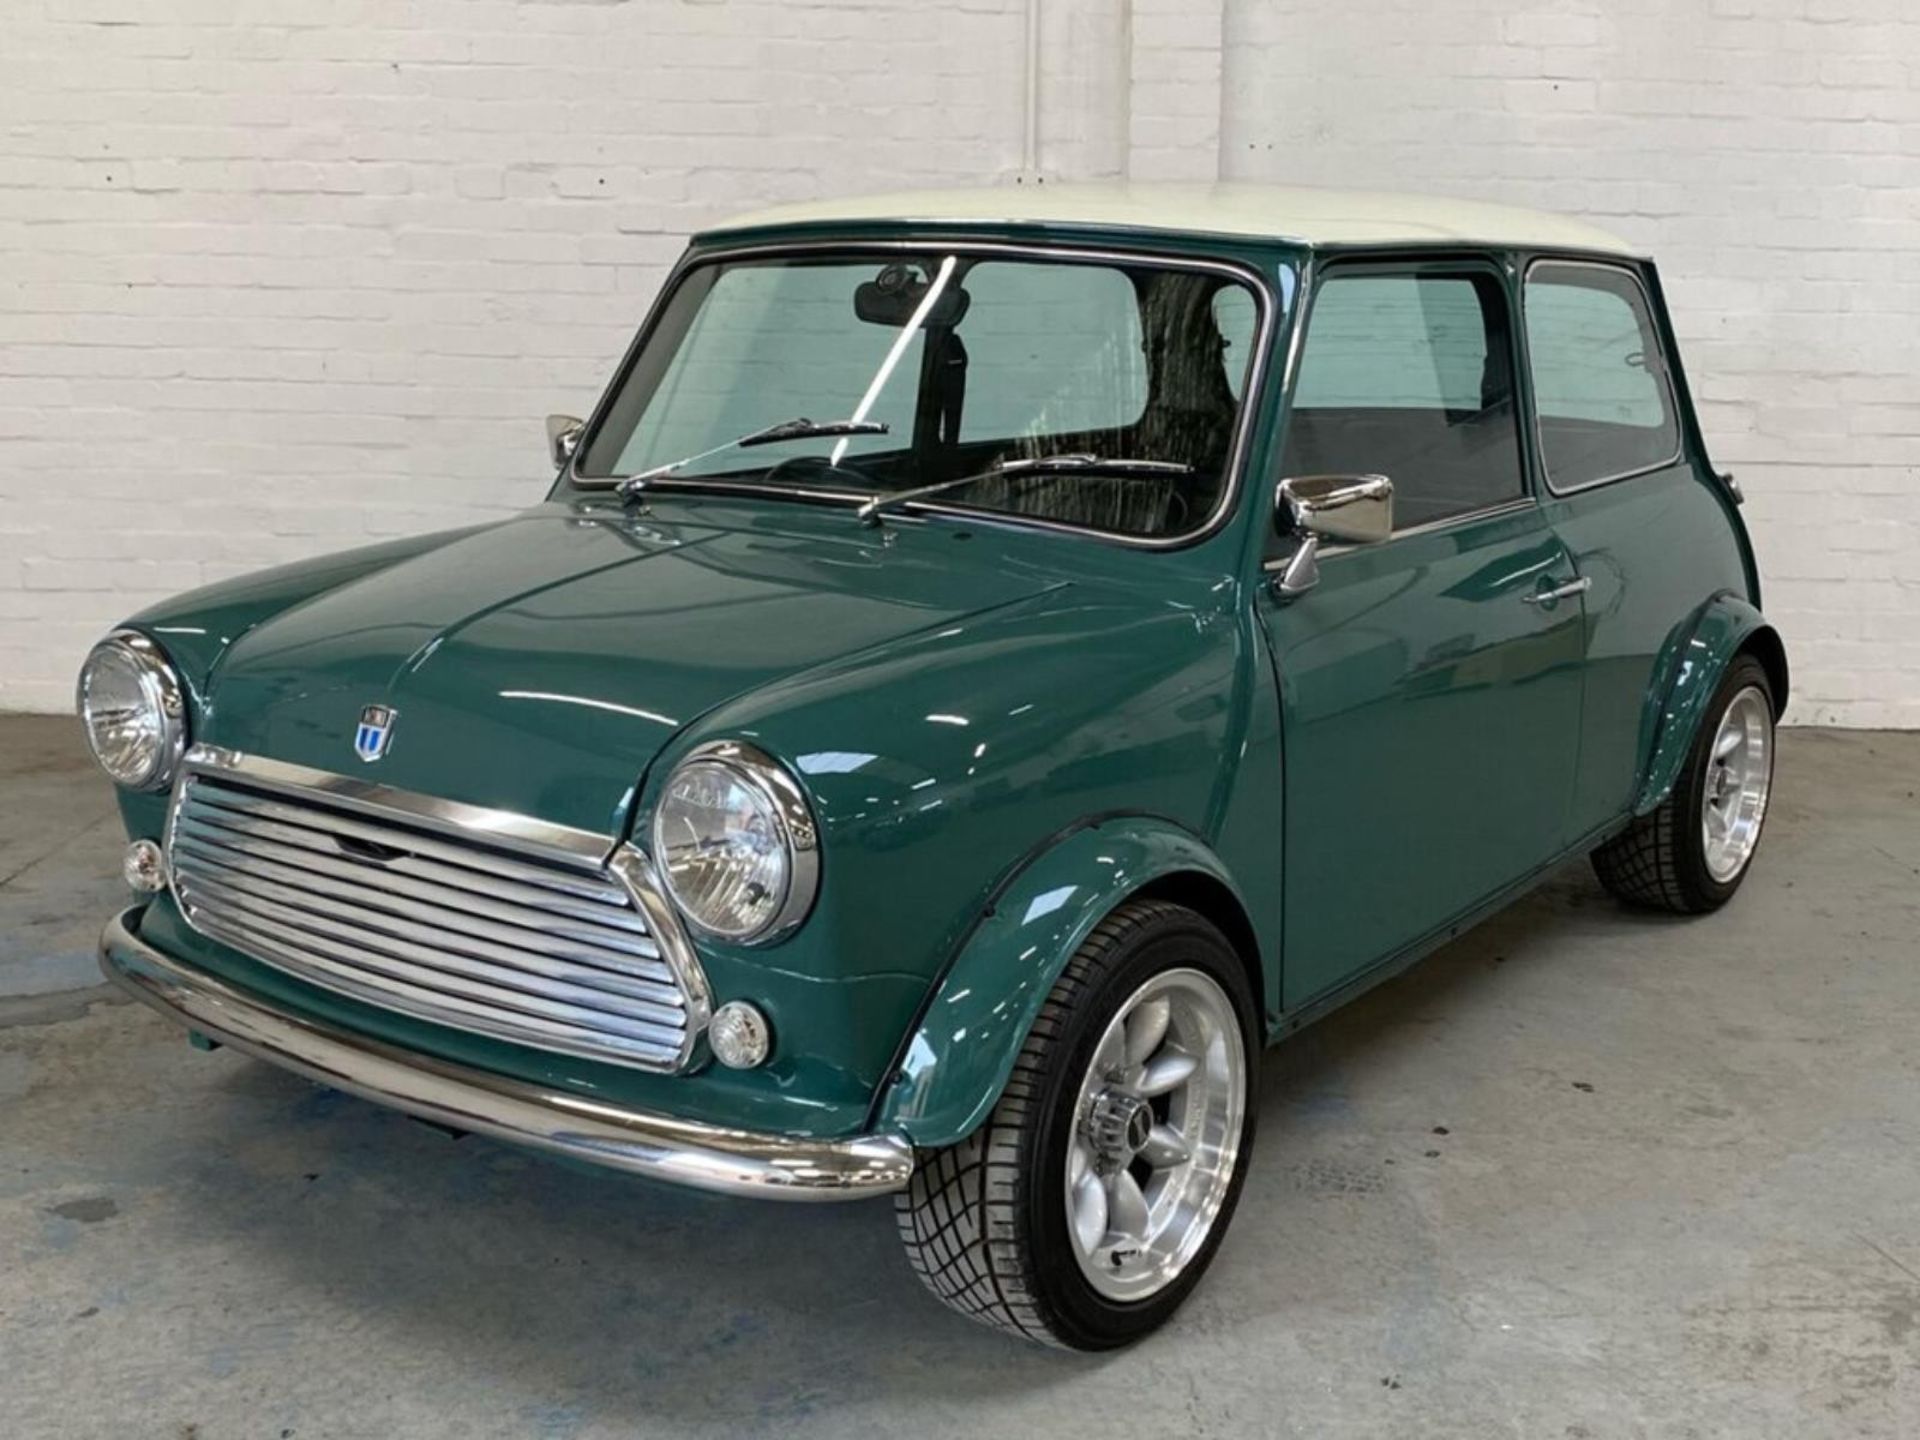 1971 Mini Cooper S Recreation Registration number KFB 656J Green with a white roof Black interior - Image 7 of 18